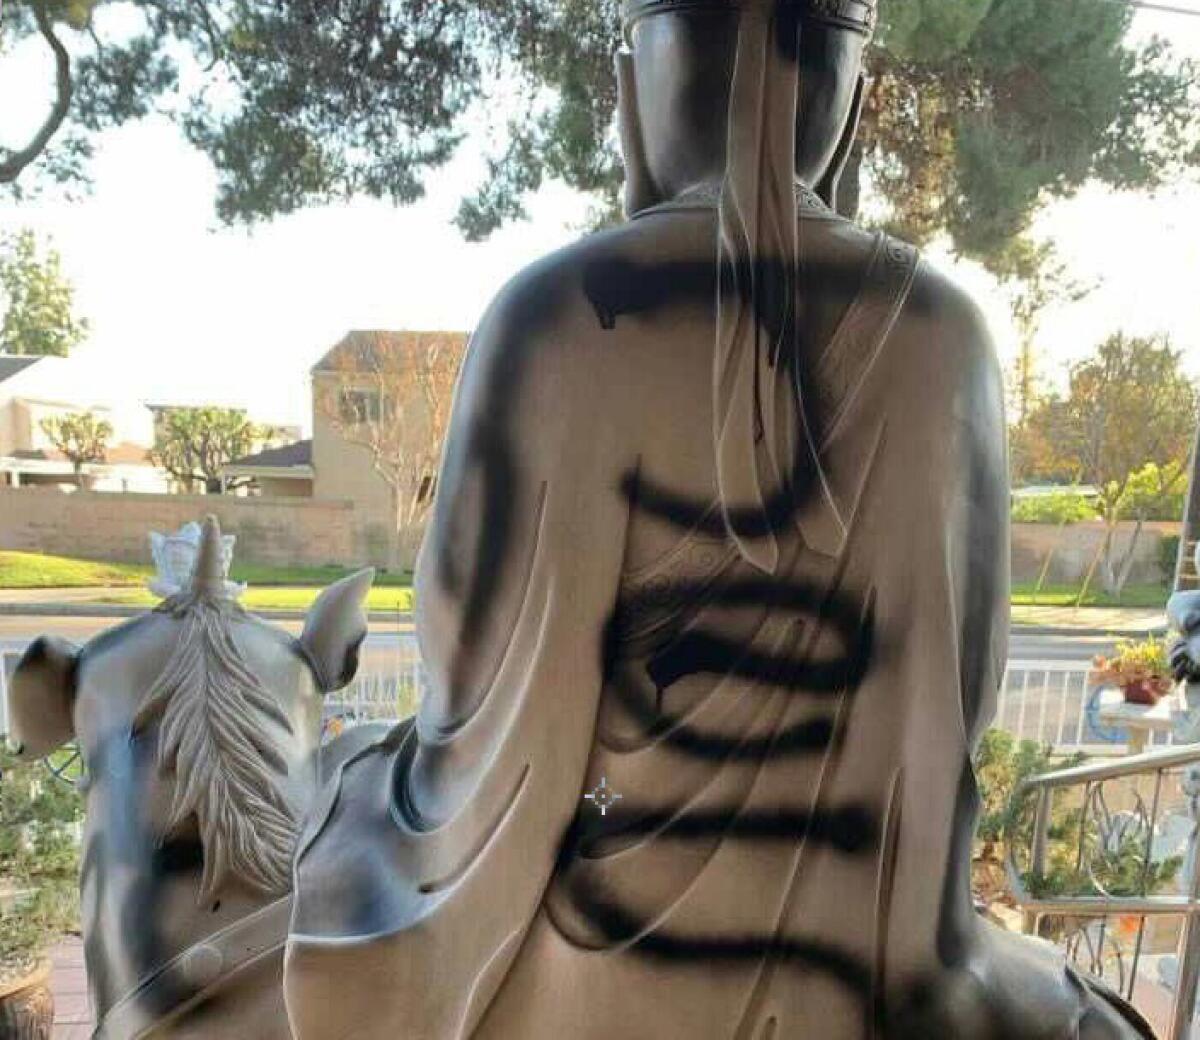 Black spray paint including the word "Jesus" on a Buddhist statue